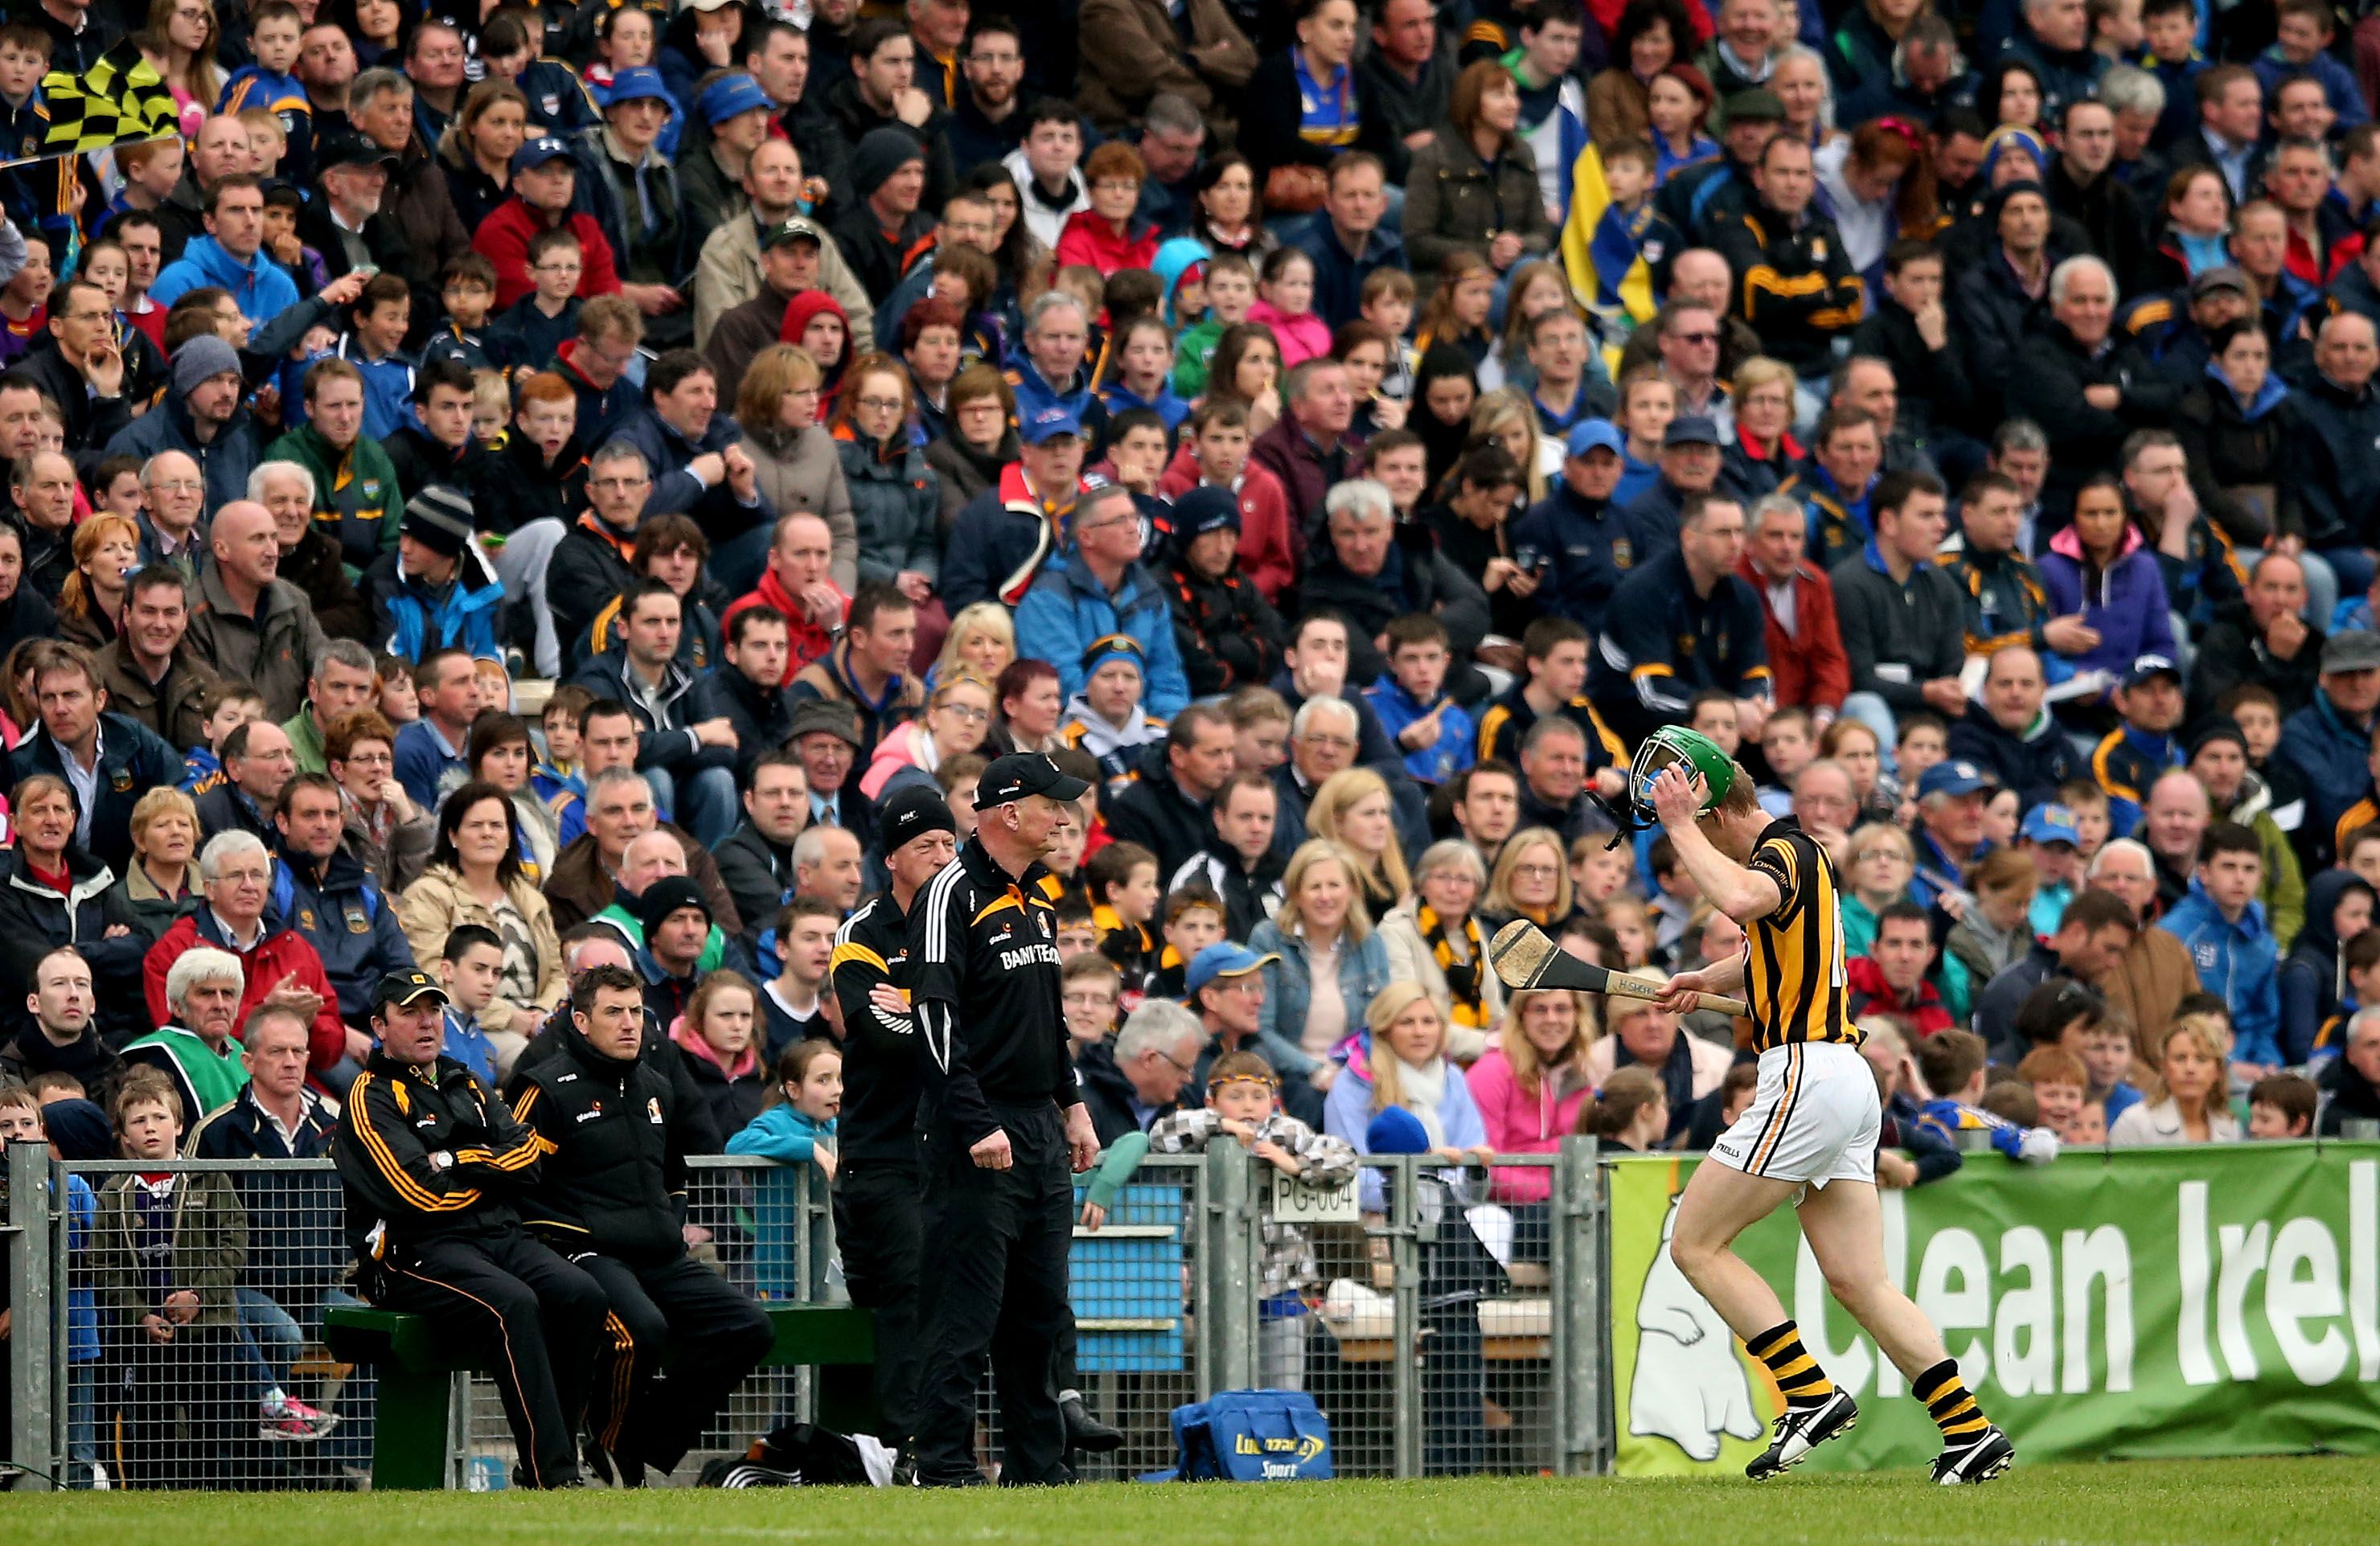 Allianz Hurling League Division 1 Final 4/5/2014 Kilkenny vs Tipperary Kilkenny’s Henry Shefflin is replaced as manager Brian Cody looks on Mandatory Credit ©INPHO/James Crombie